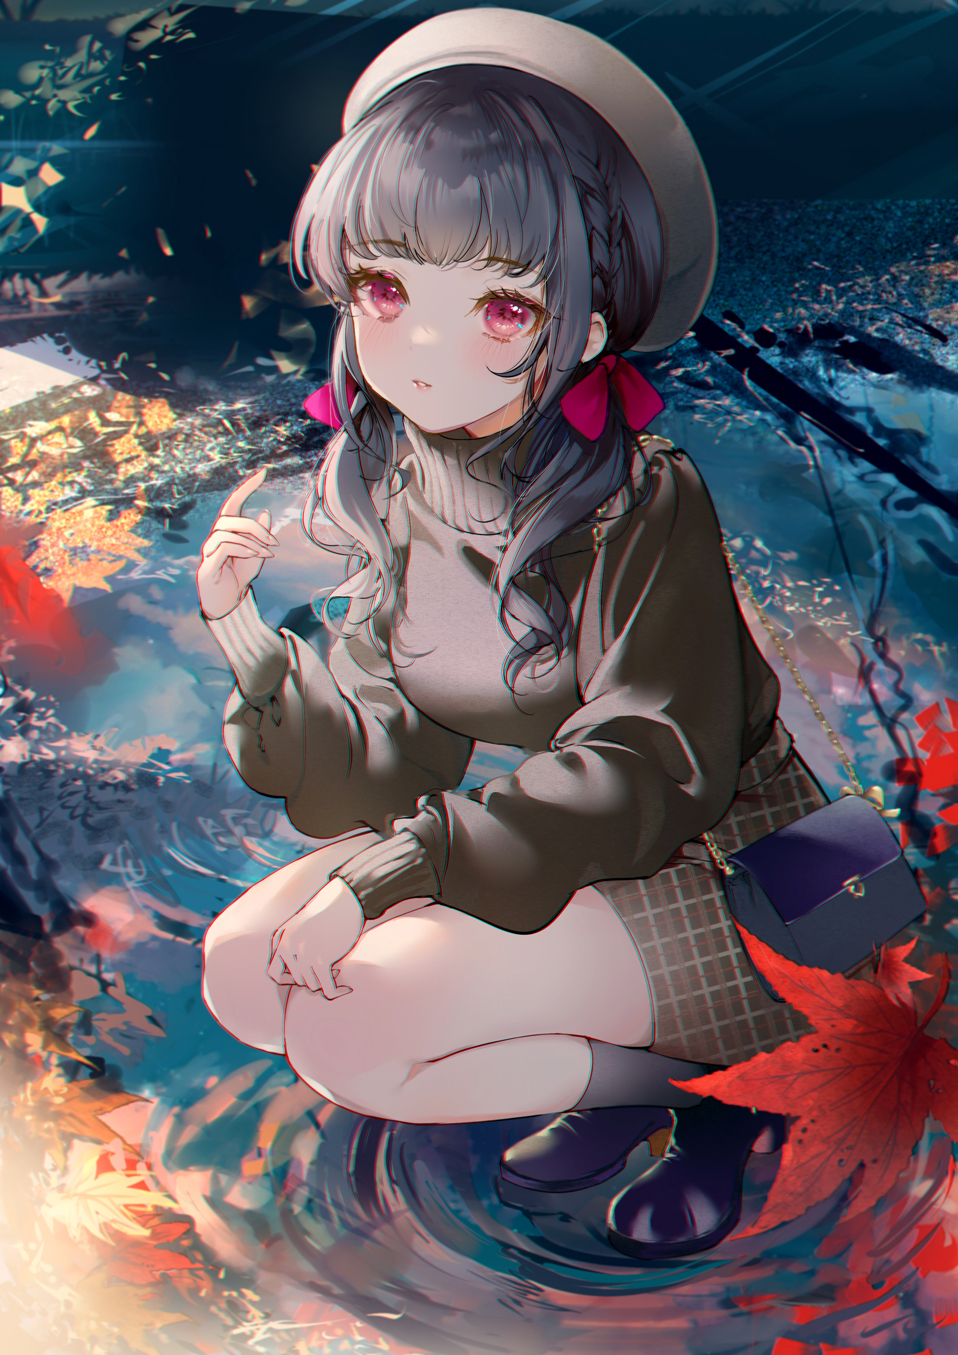 Anime Anime Girls Pixiv Portrait Display Leaves Water Looking At Viewer Braids Red Eyes Hat Purse Bl 958x1355